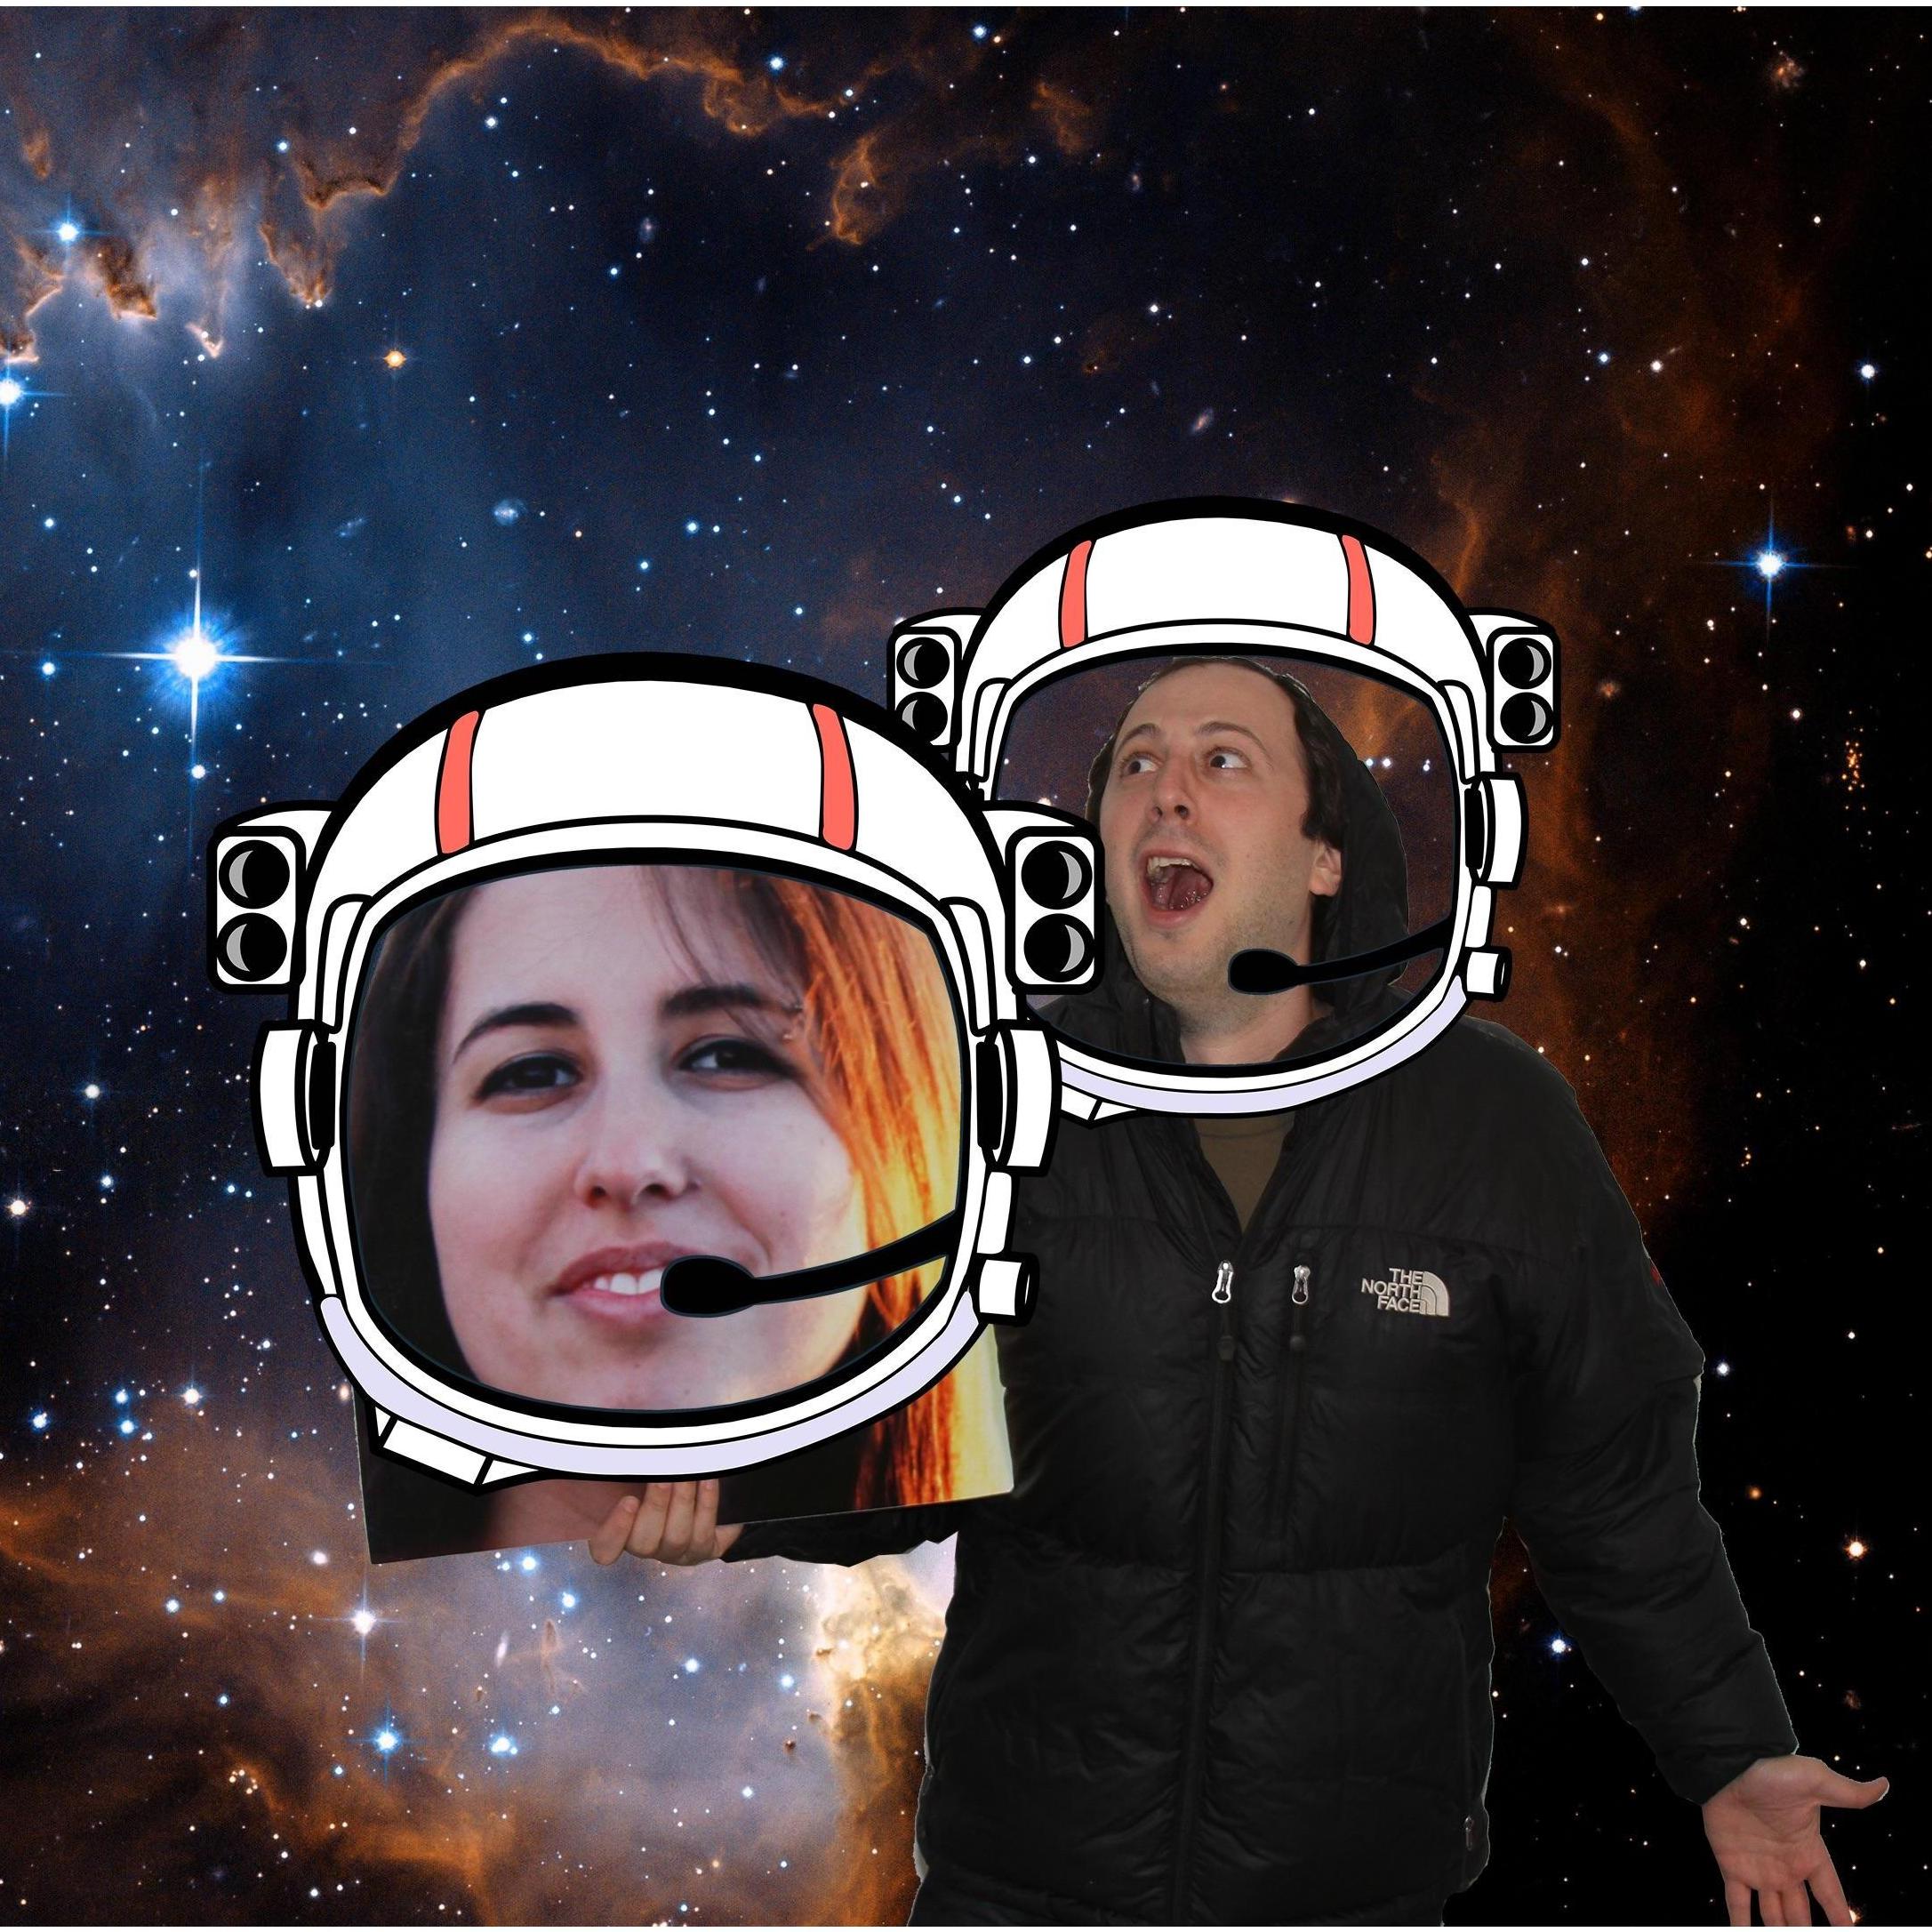 Our trip to outer space!